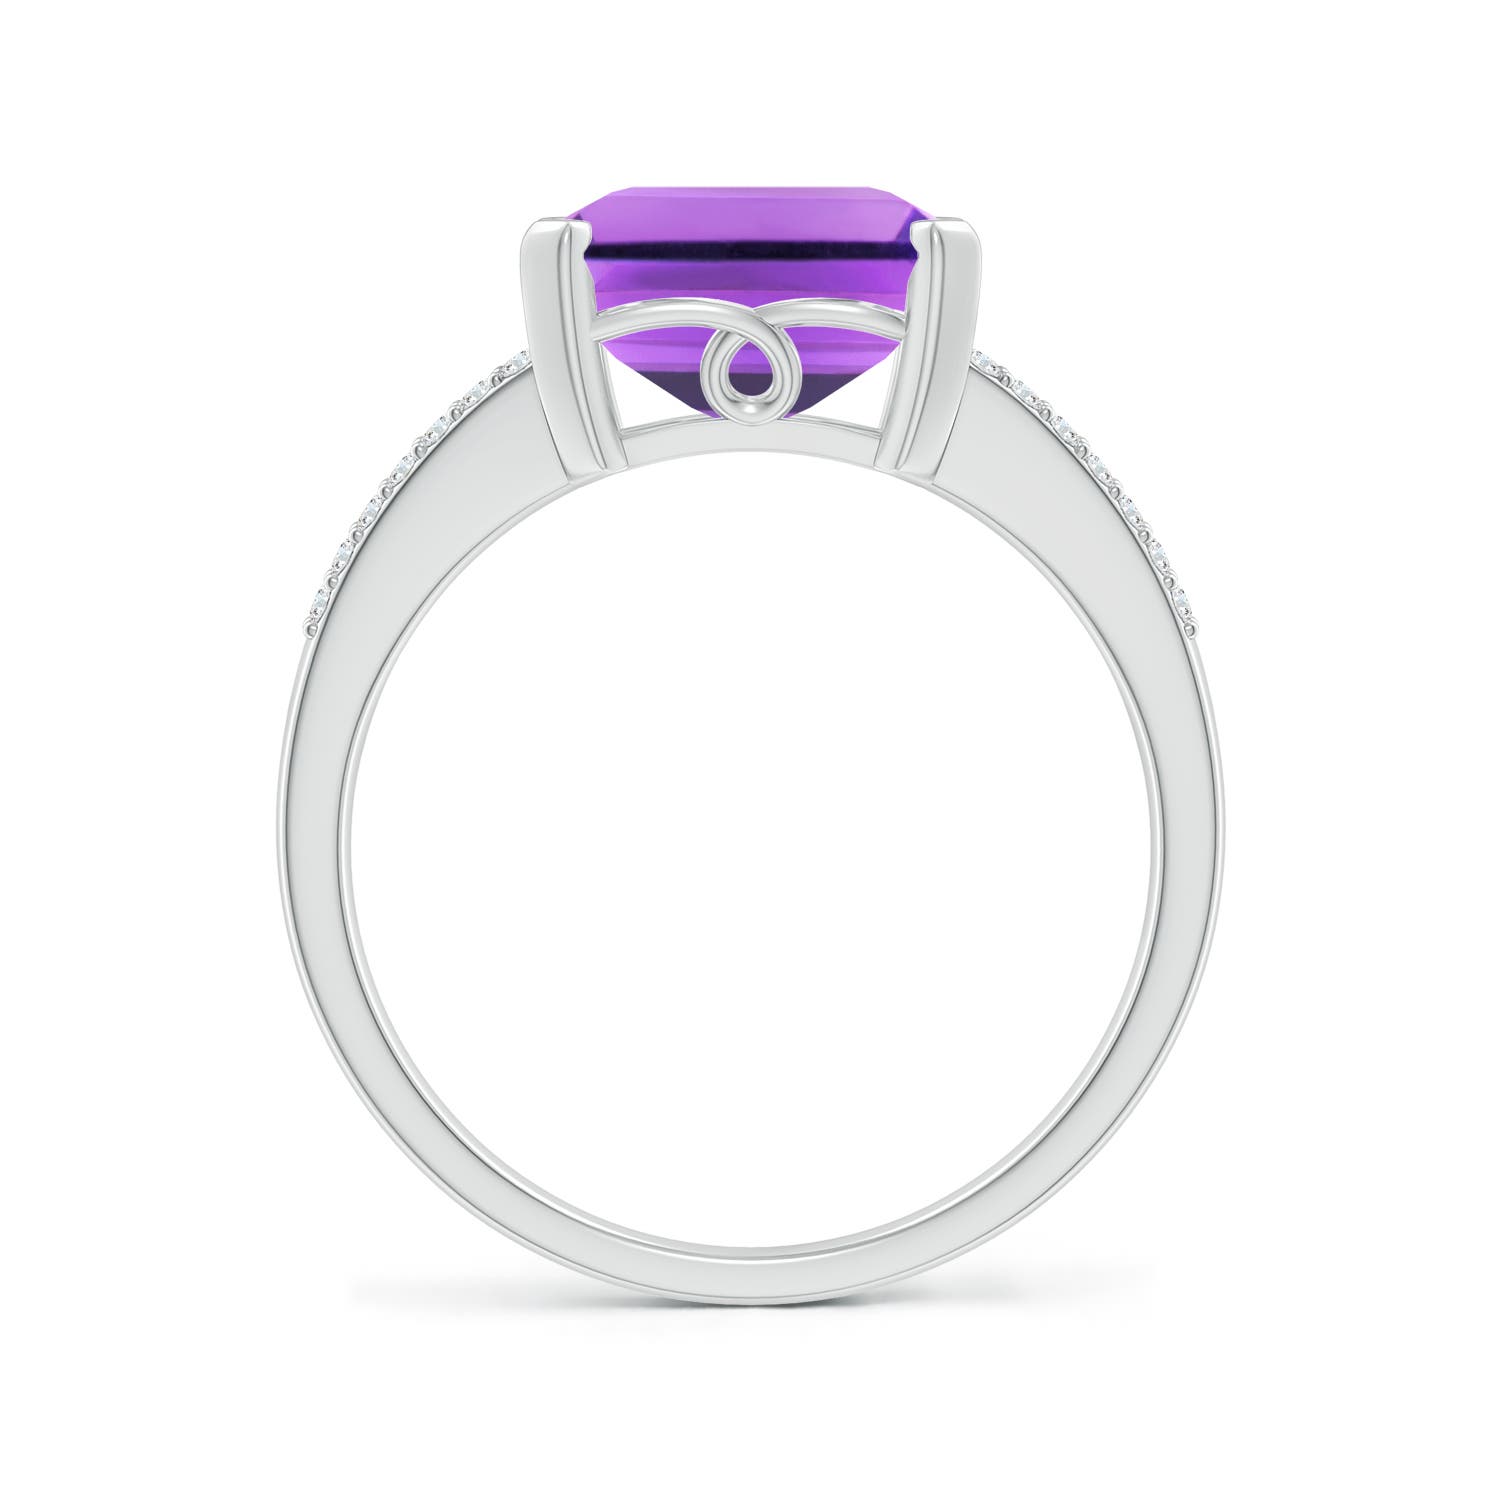 AA - Amethyst / 4.14 CT / 14 KT White Gold